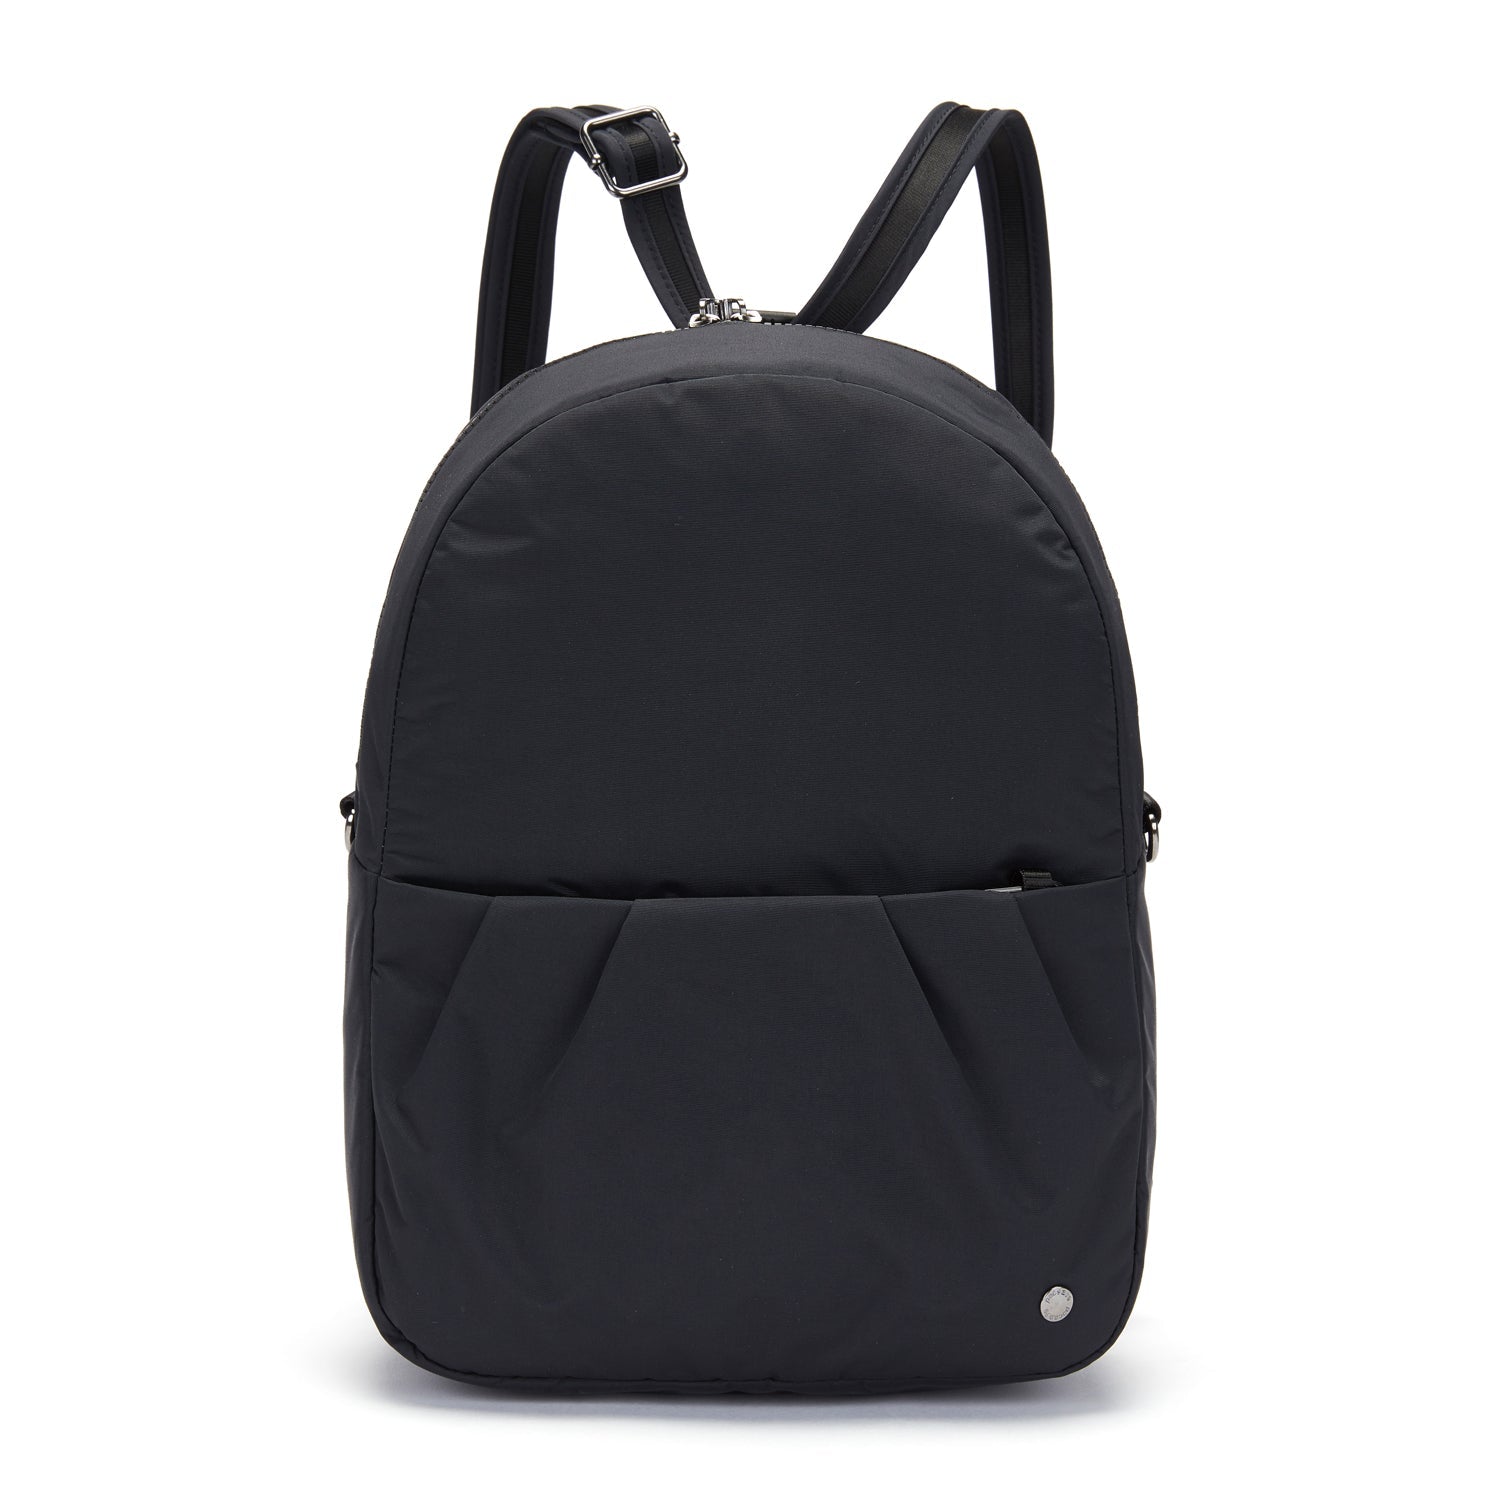 Elina Convertible Backpack - SHB2976001 - Fossil